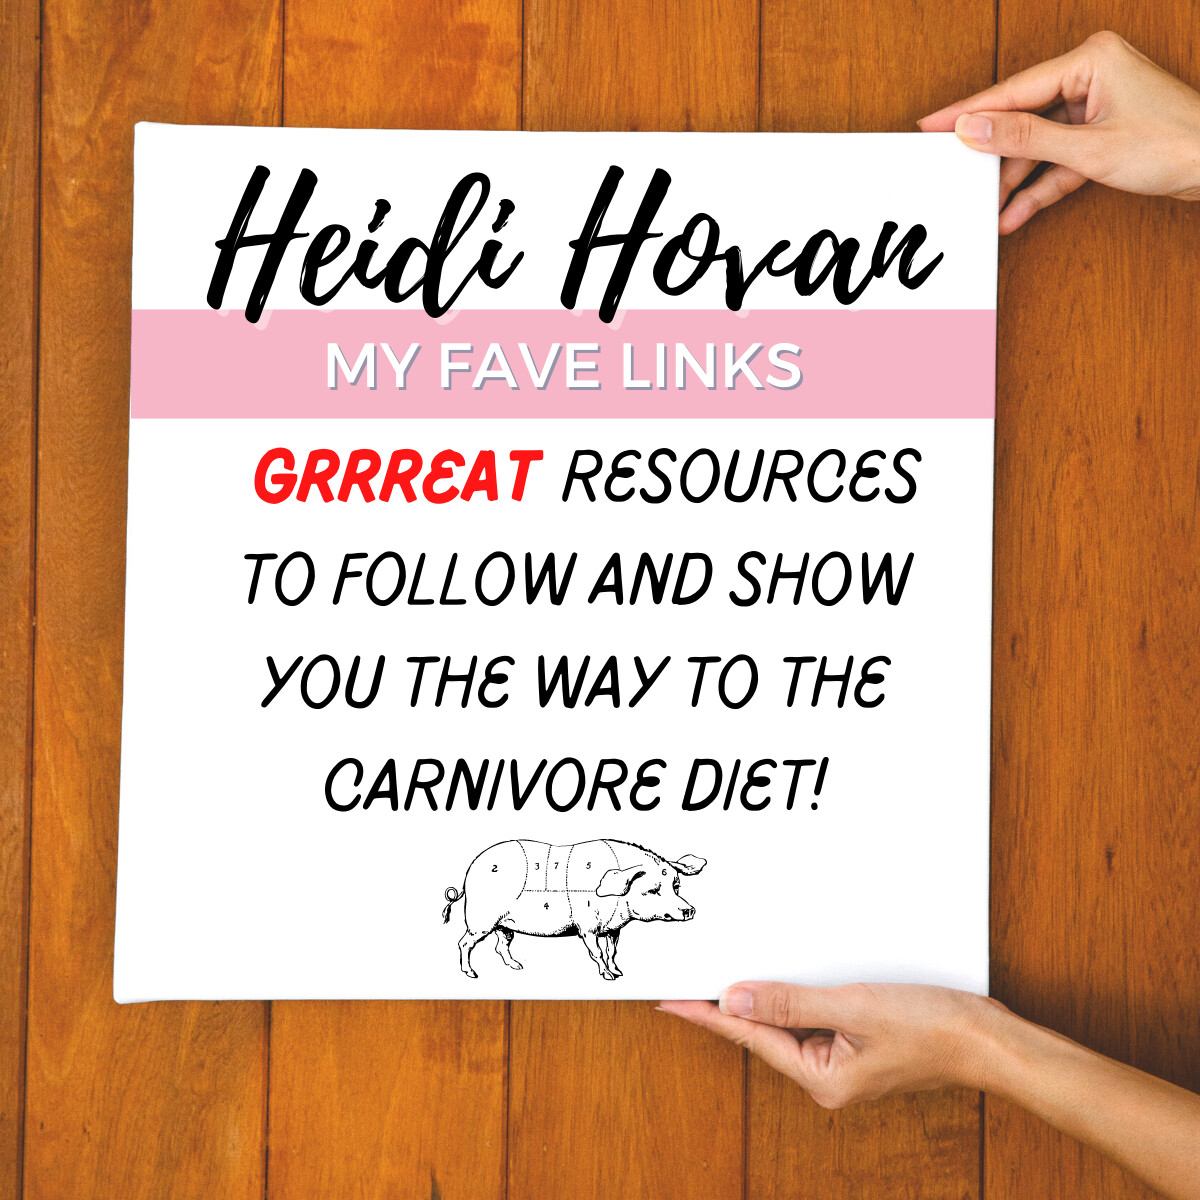 Some GRRREAT resources to follow and show you the way to a carnivore Diet! 